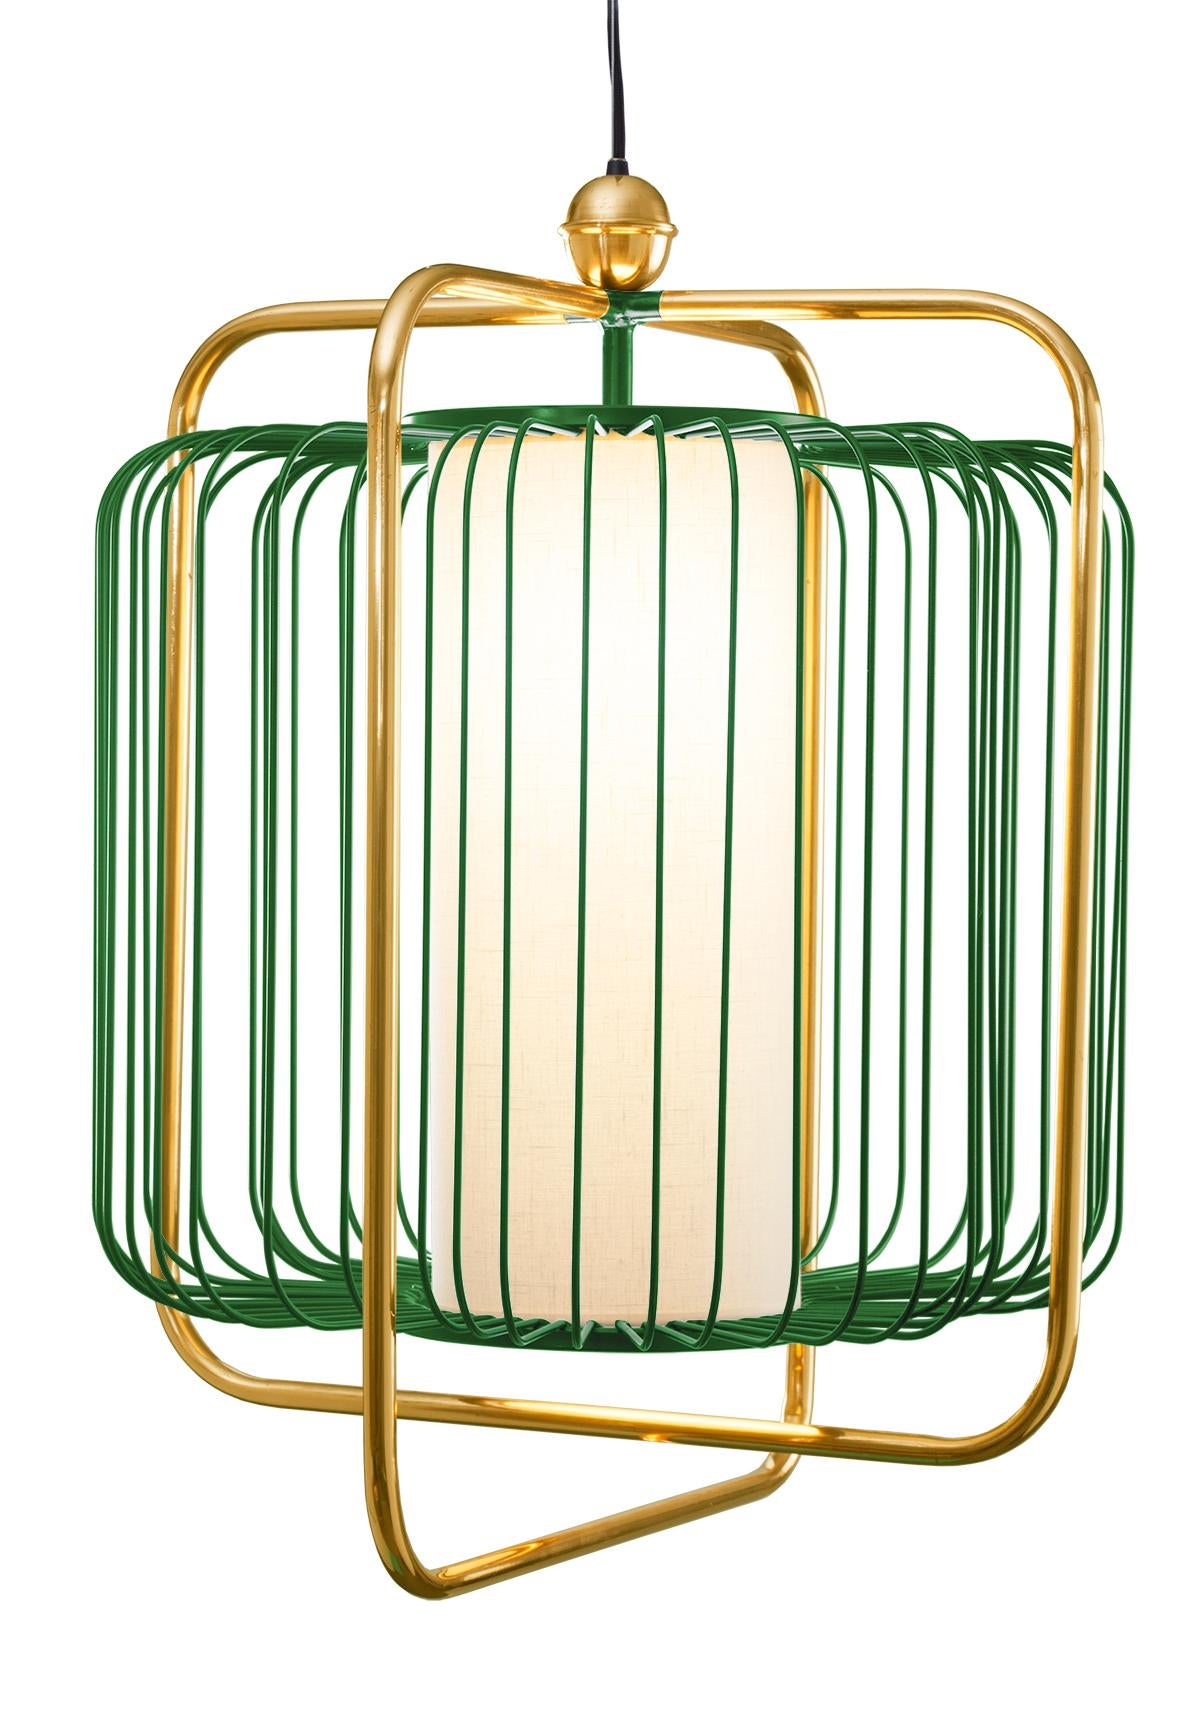 Contemporary Art Deco inspired Jules Pendant Lamp in Brass and Black For Sale 1